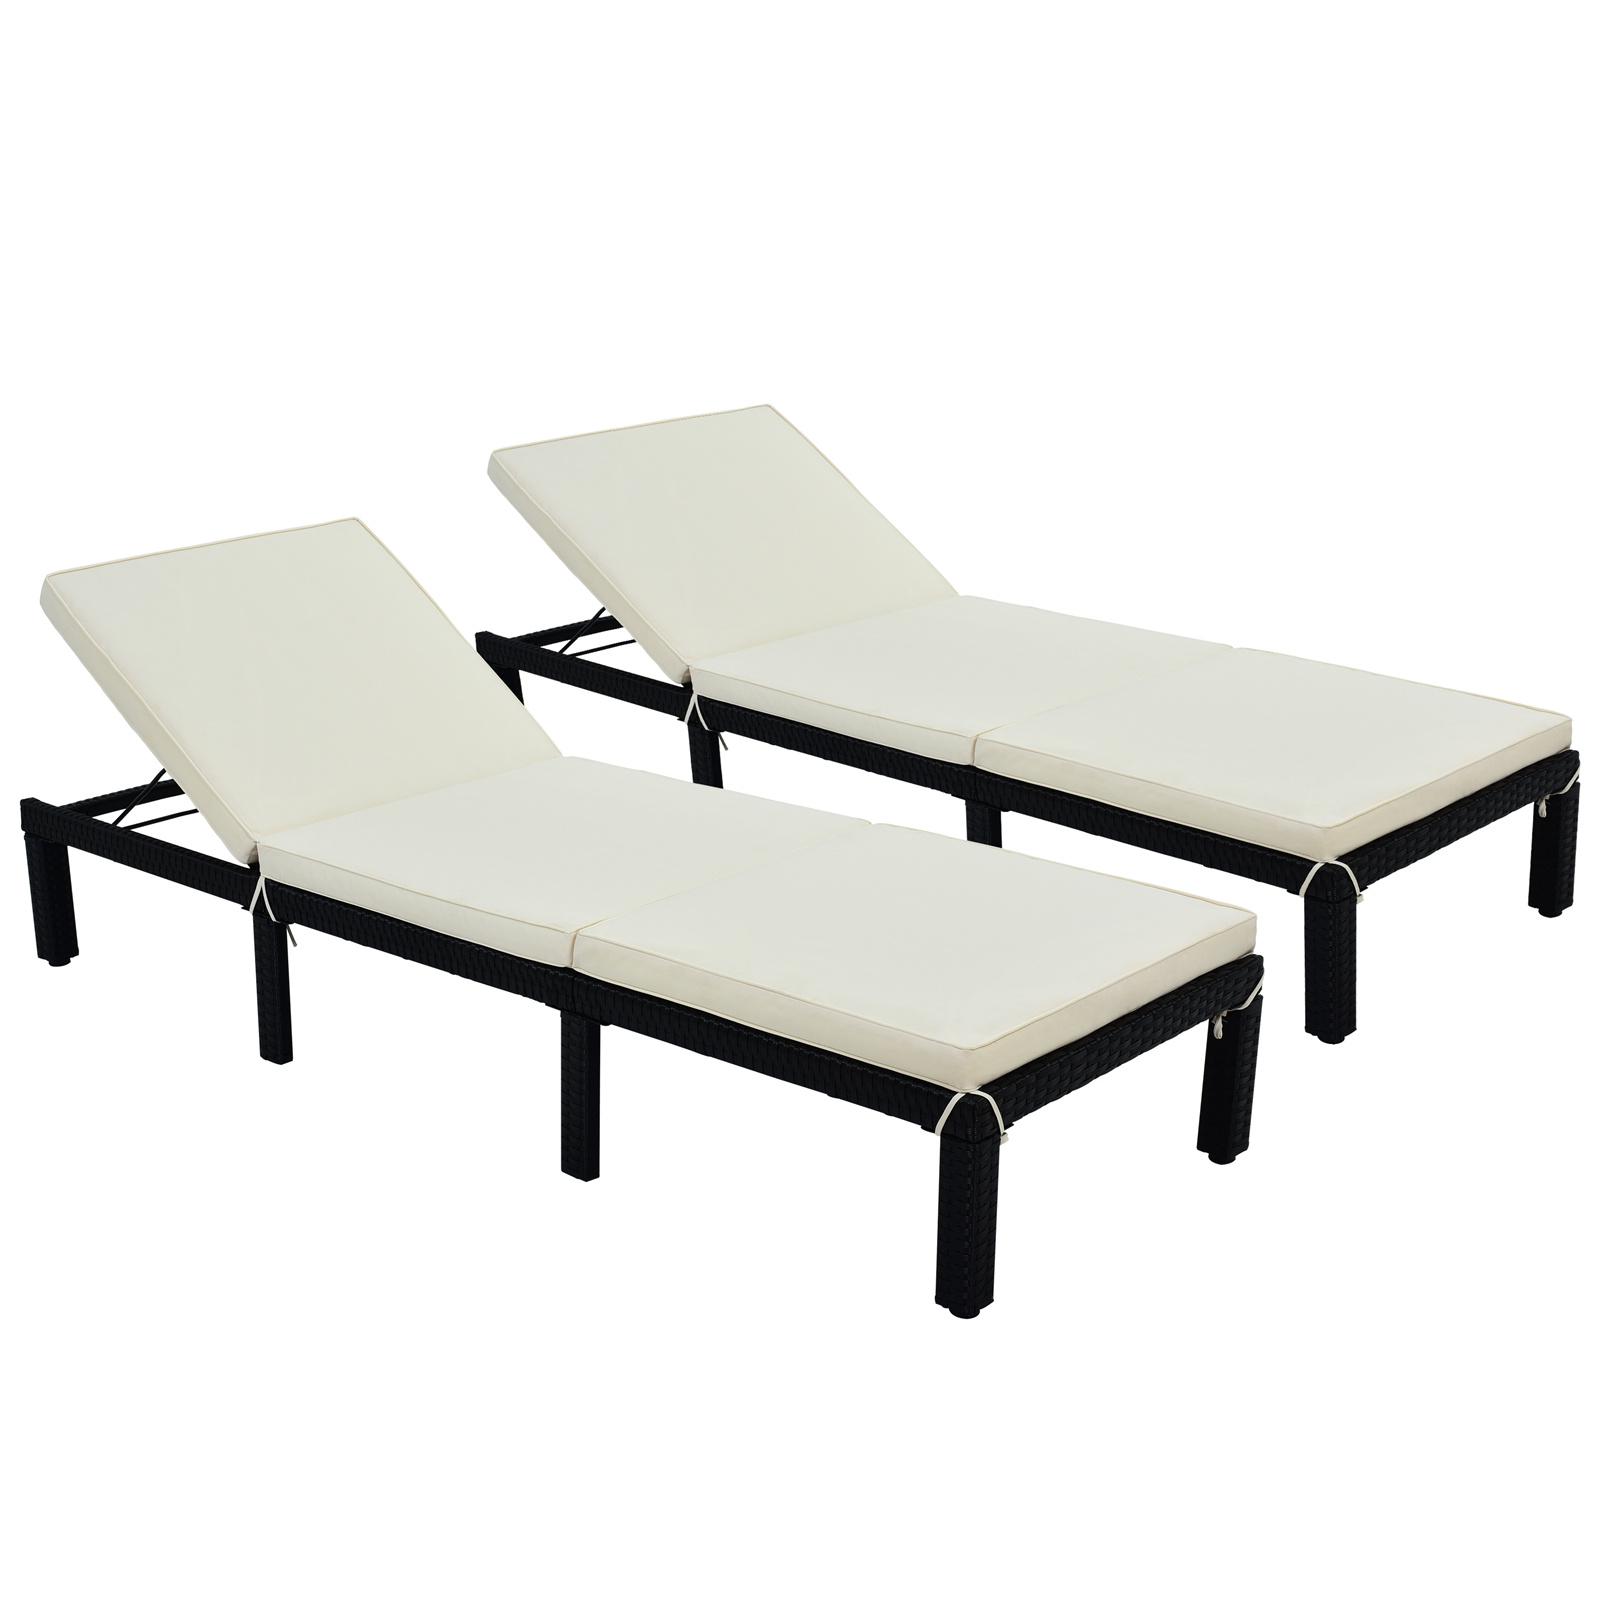 Patio Furniture Outdoor Adjustable Beach Lounge Chair Rattan Wicker Chaise with cushion Sunbed, Set of 2,Beige - image 3 of 7